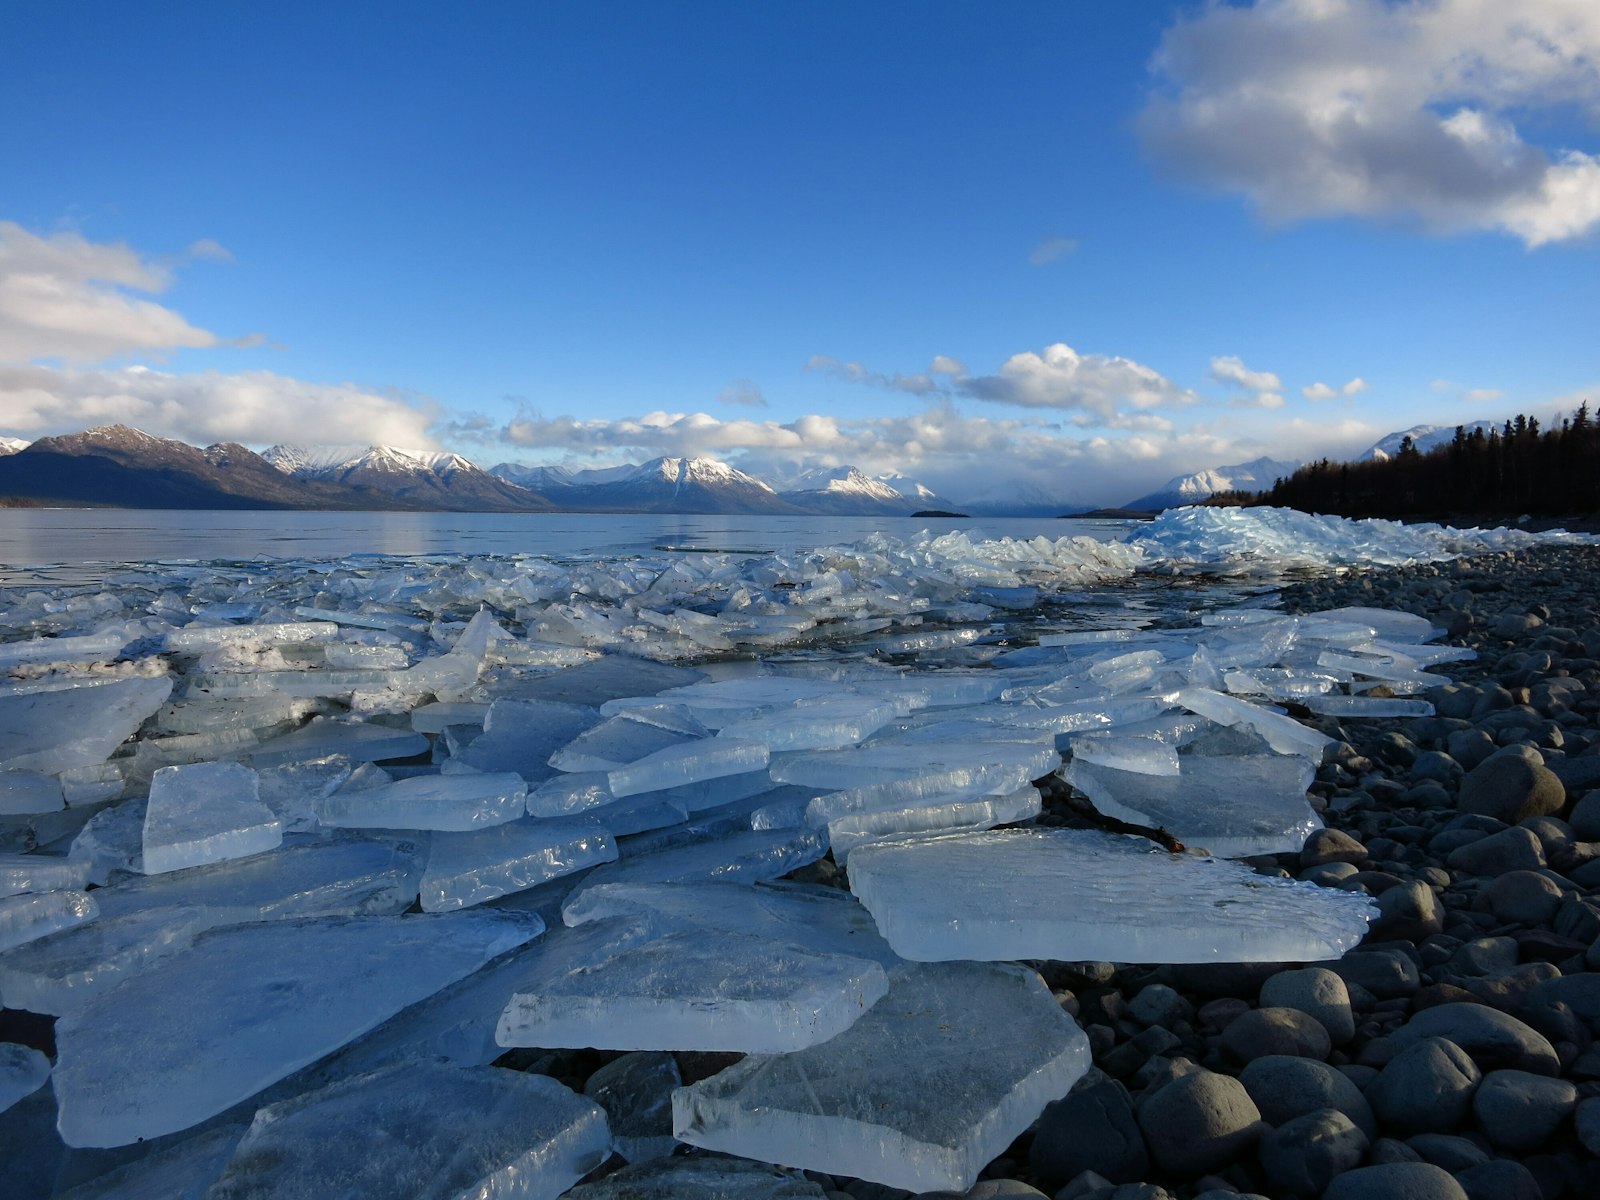 Blocks of ice atop a rocky beach. In the distance you can spot snow-topped mountain ranges